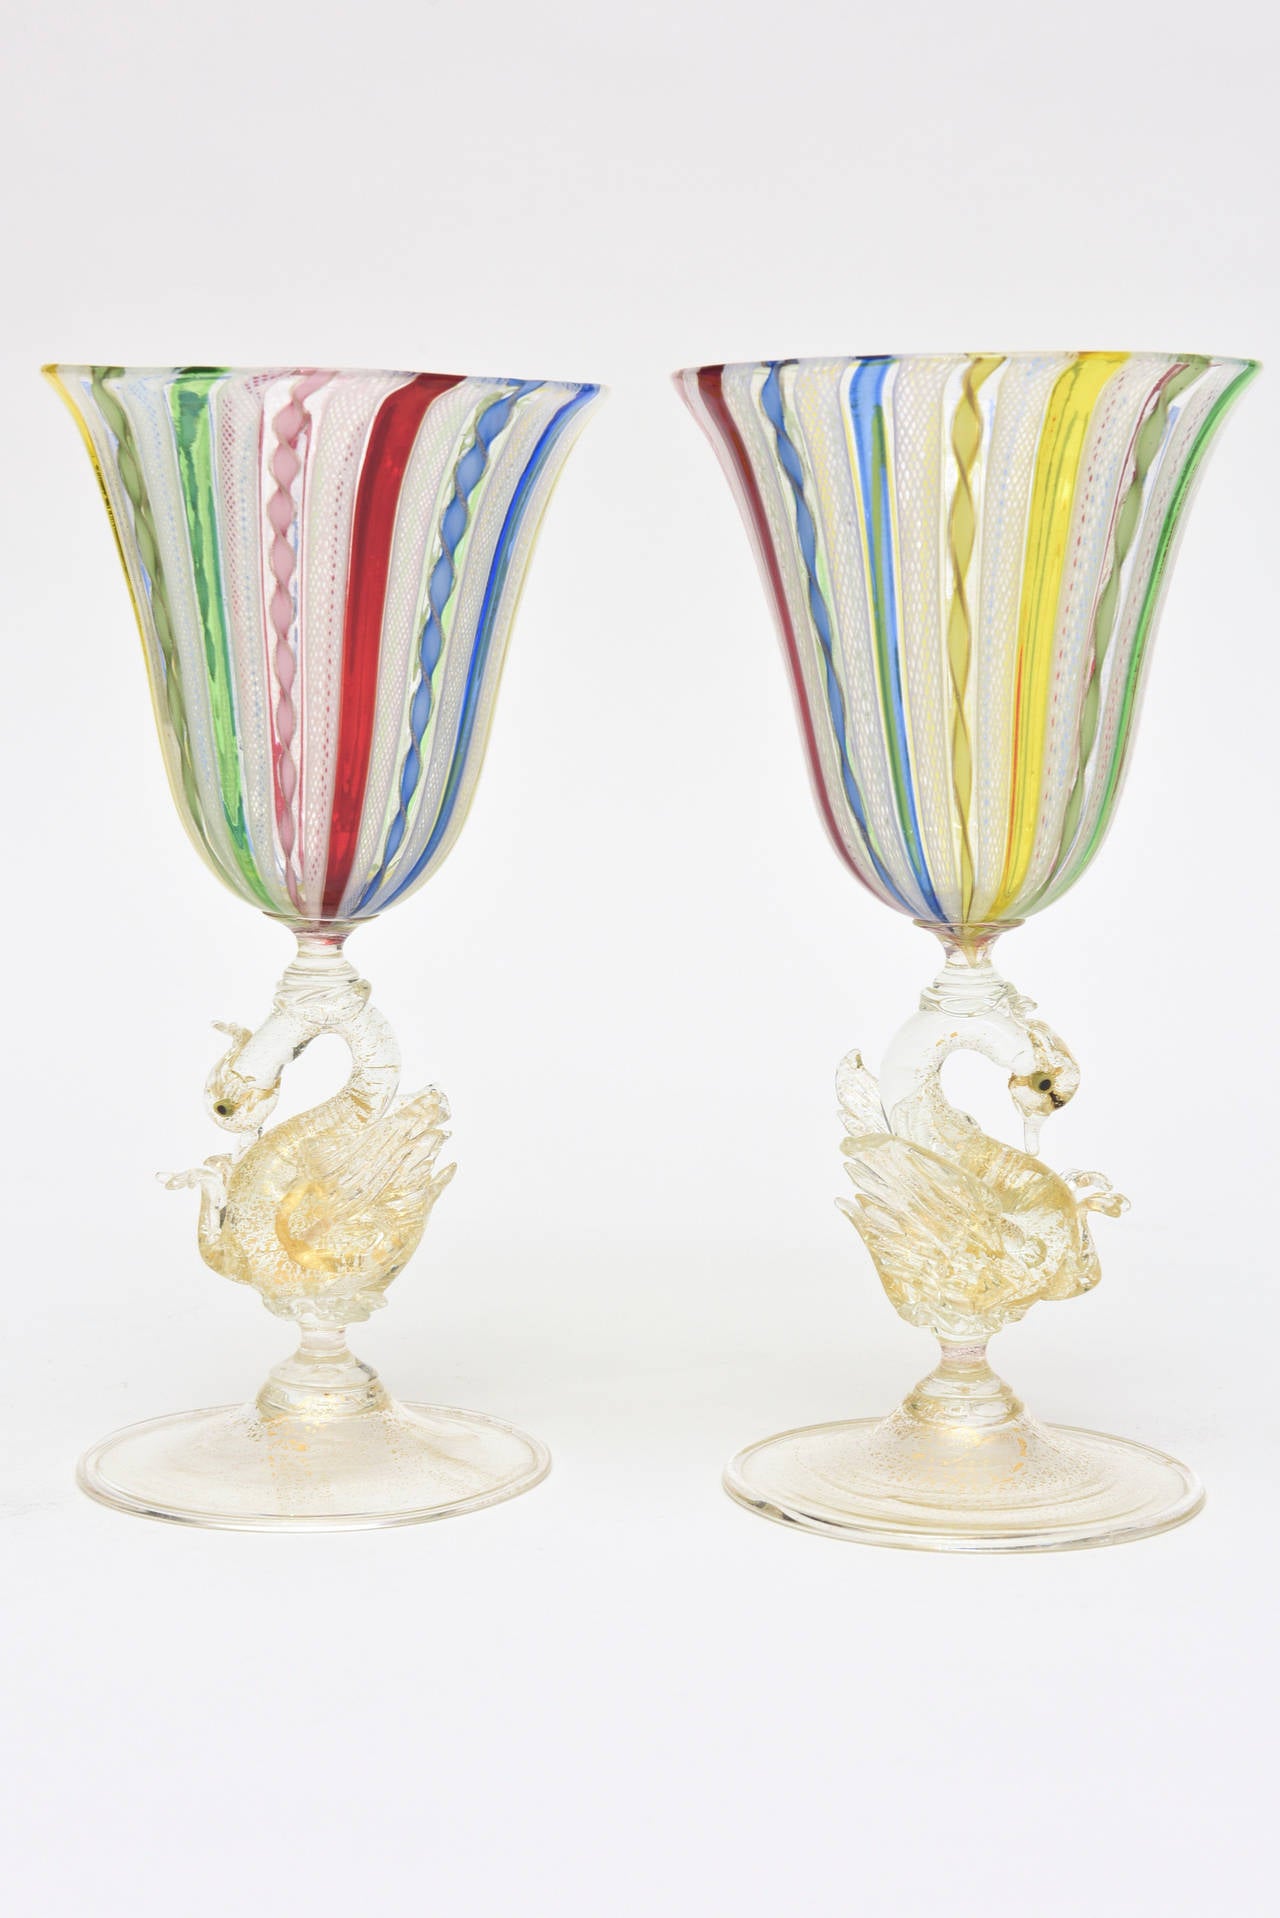 Pair of Early Venetian Glass Multicolored Latticino and Gold Aventurine Goblets 1